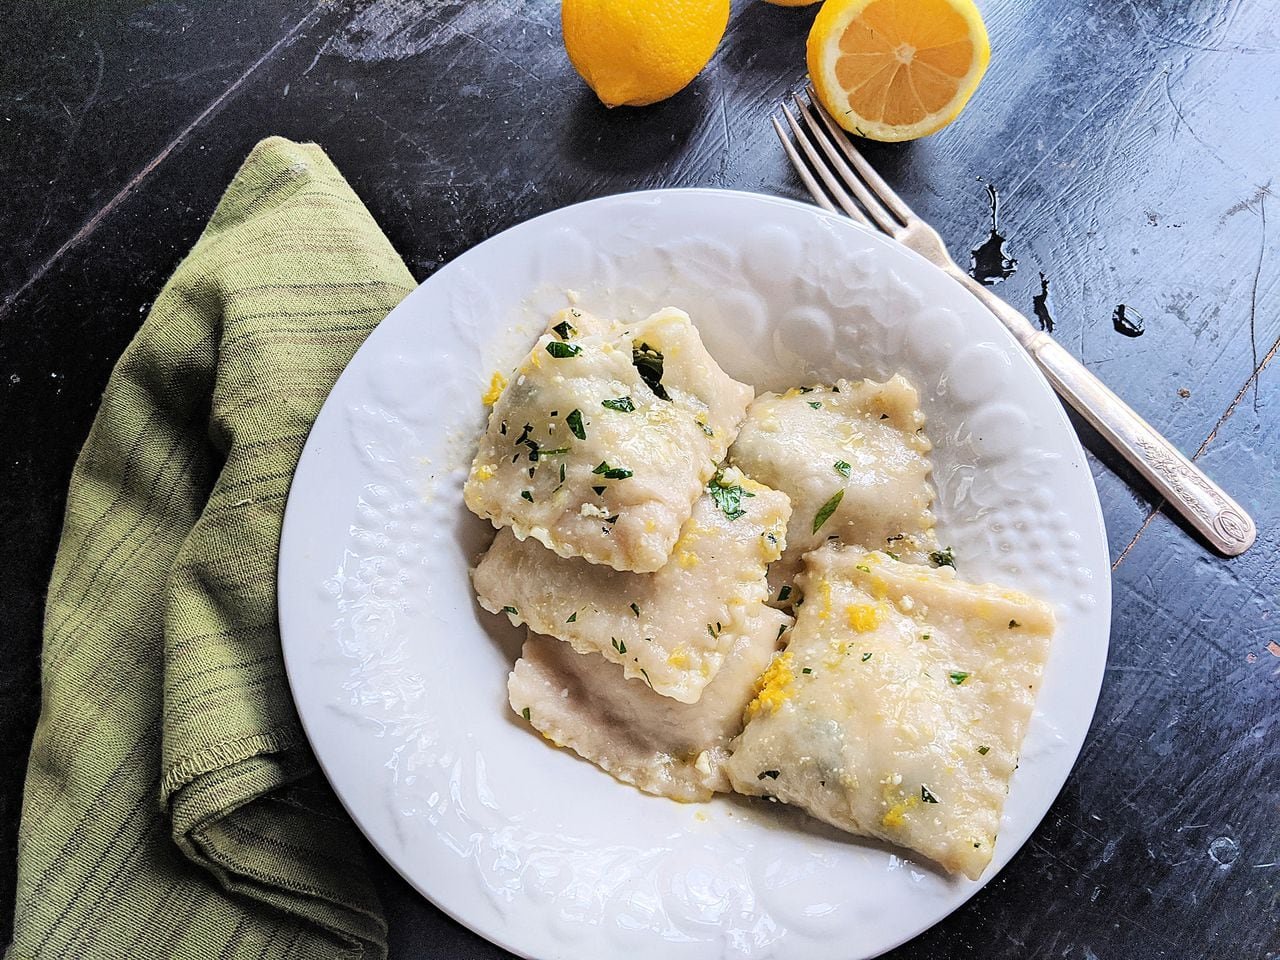 Don’t be afraid to try lemon spinach ravioli